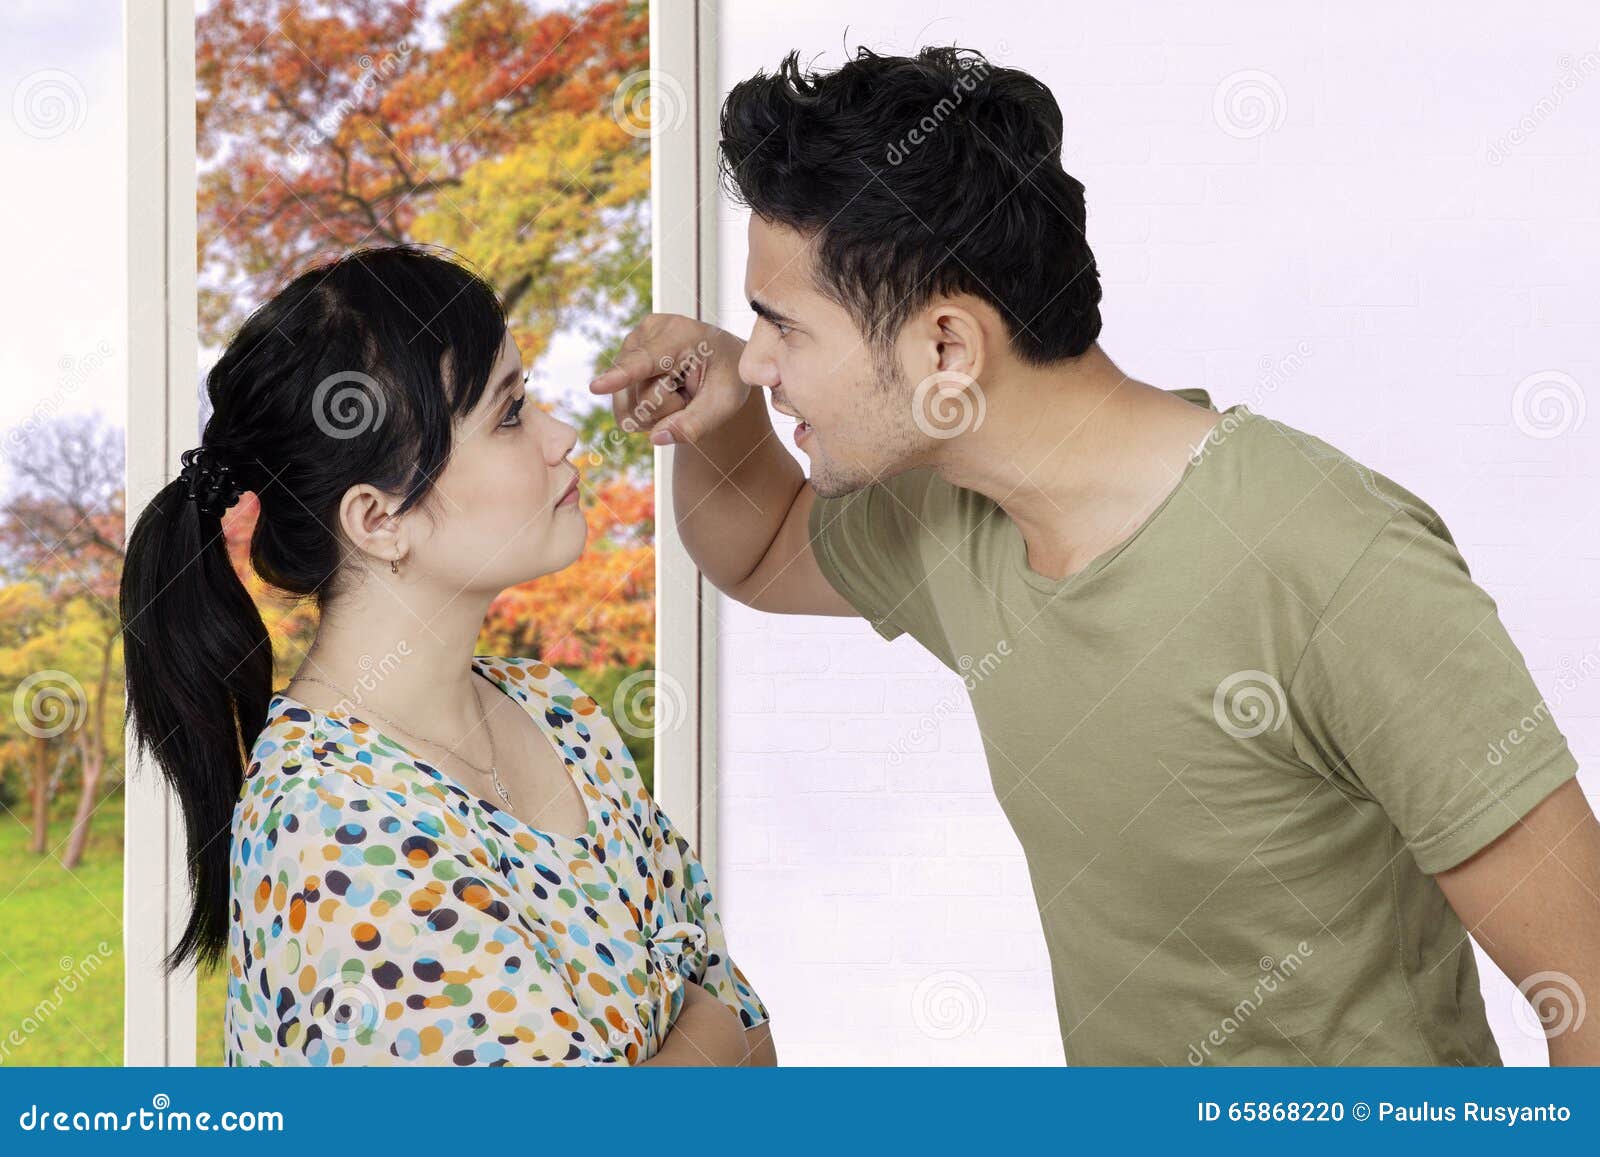 Married Couple Quarreling At Home Stock Photo Image Of Expression